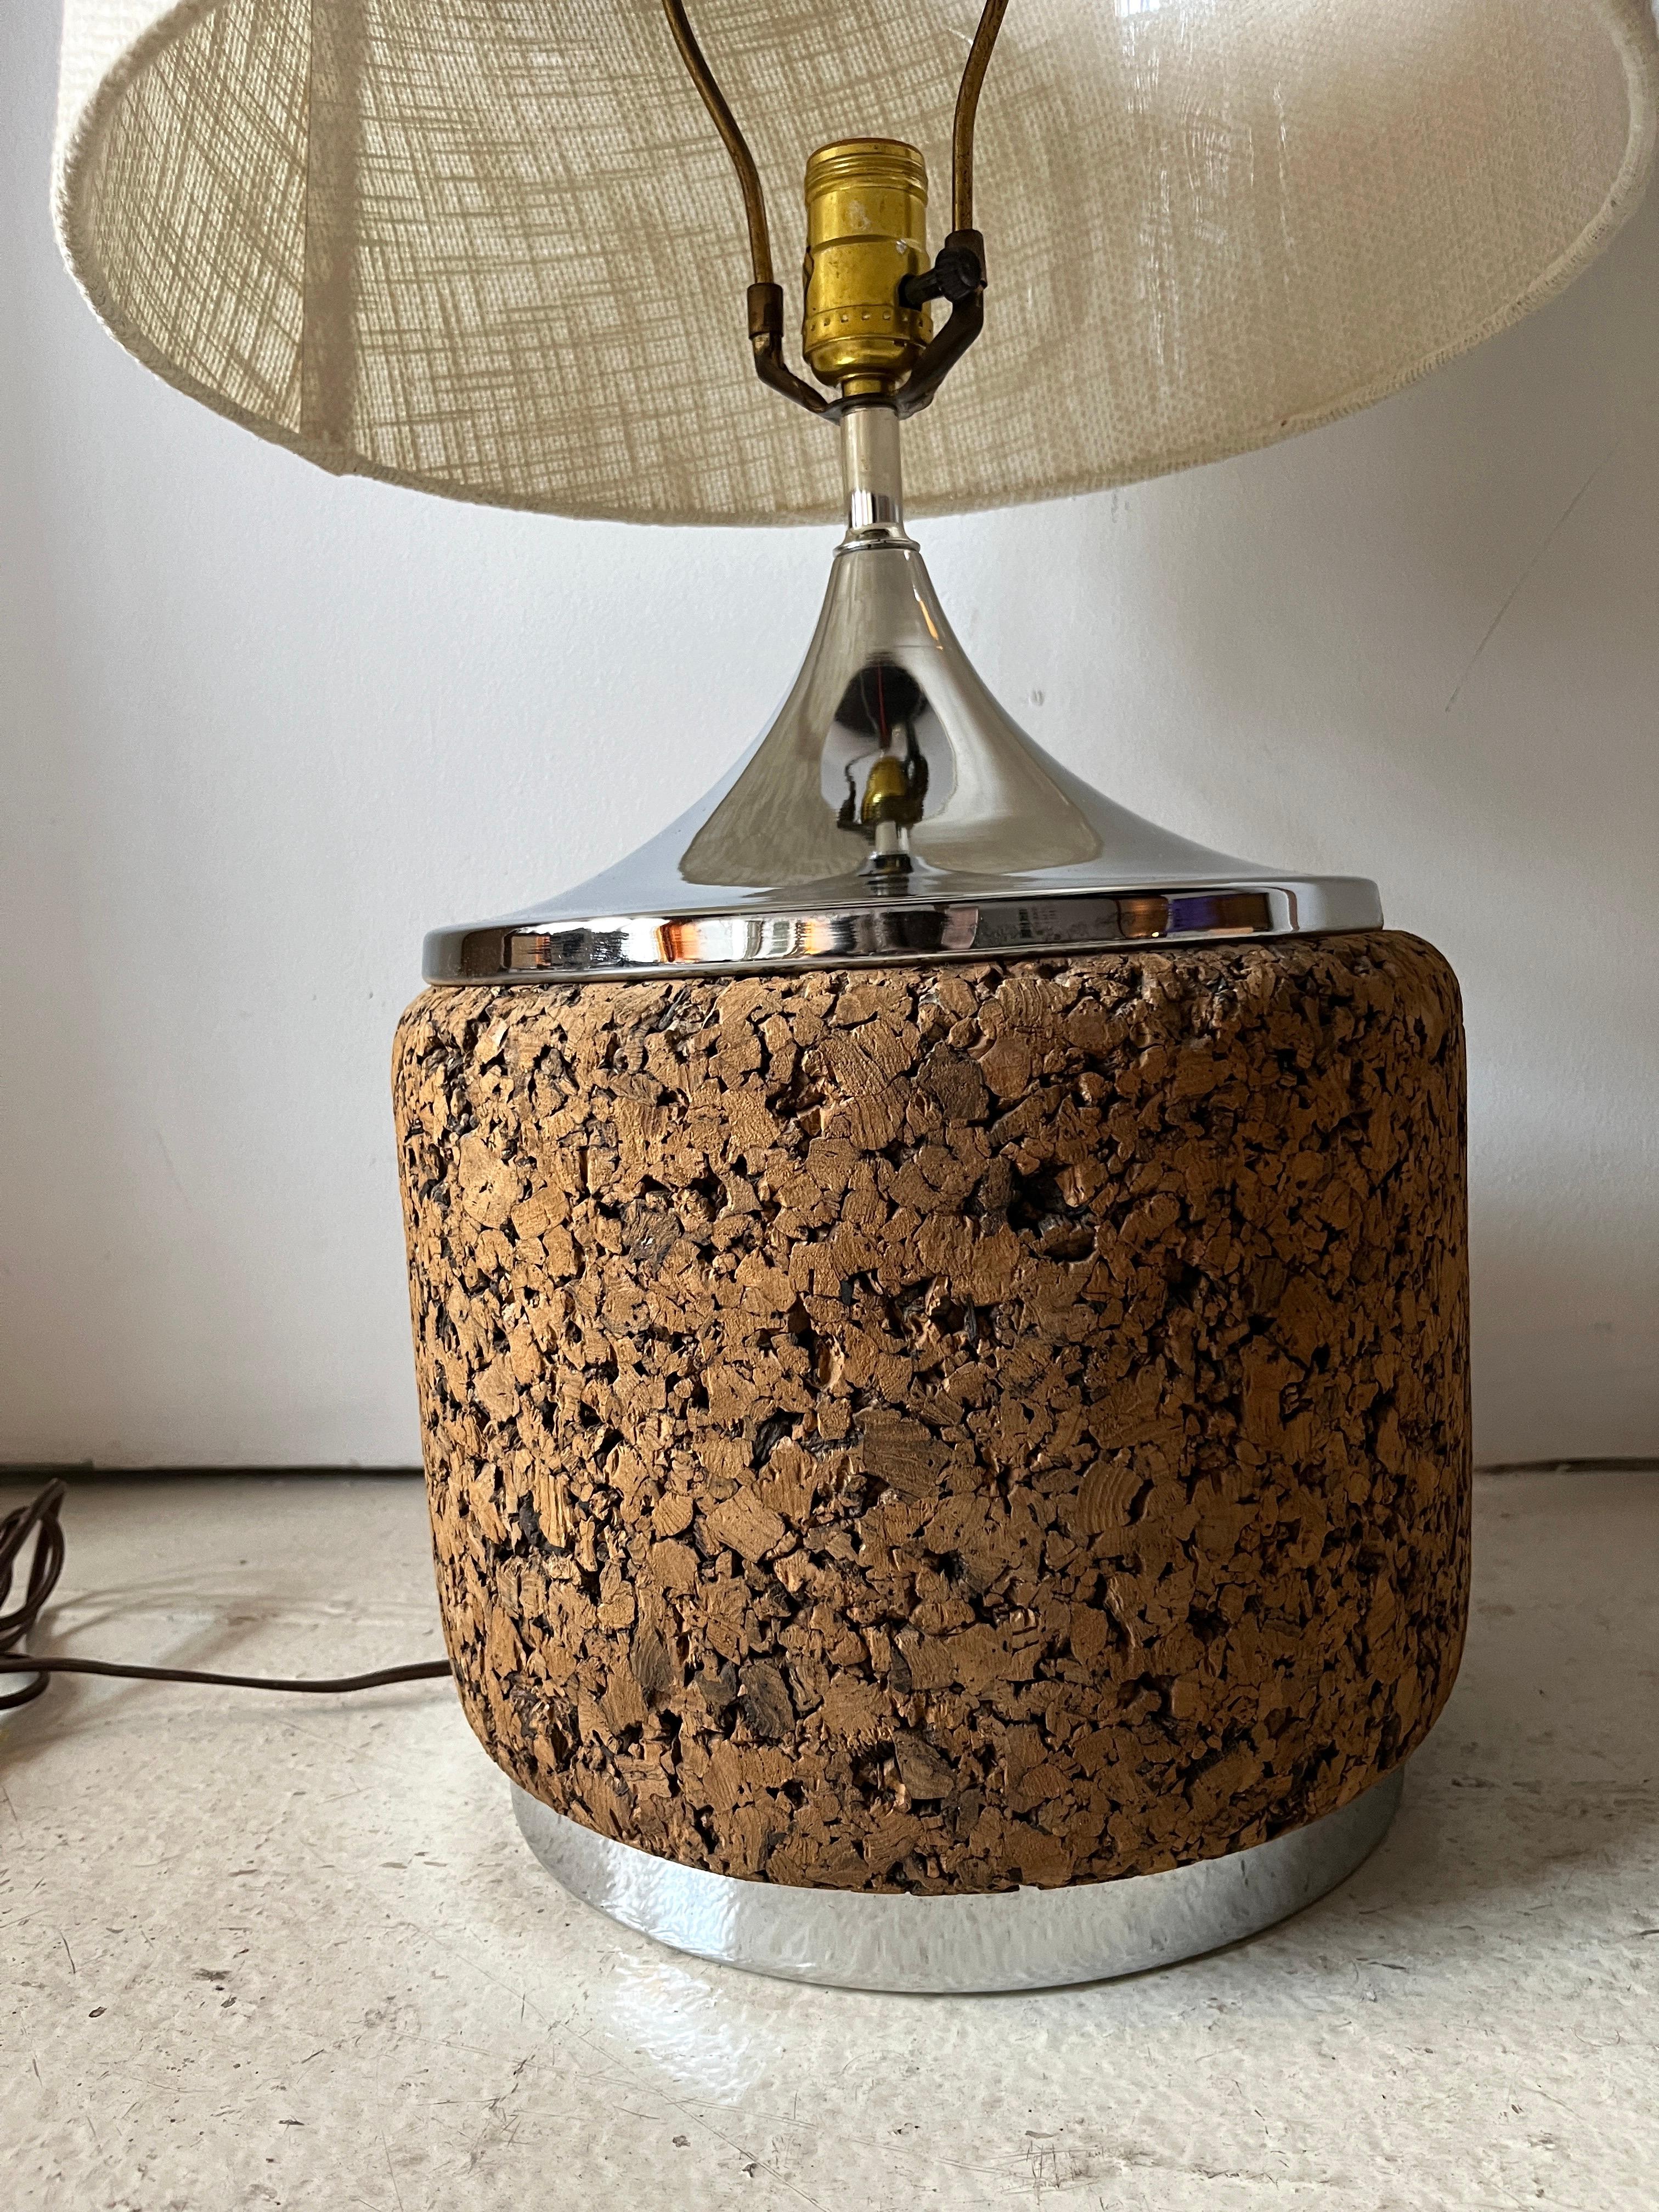 Mid-century large cork and mirror chrome (trim and base) table lamp.

Very good to excellent original condition. Chrome has been polished, no pitting. Cork has good color.

Measures 15